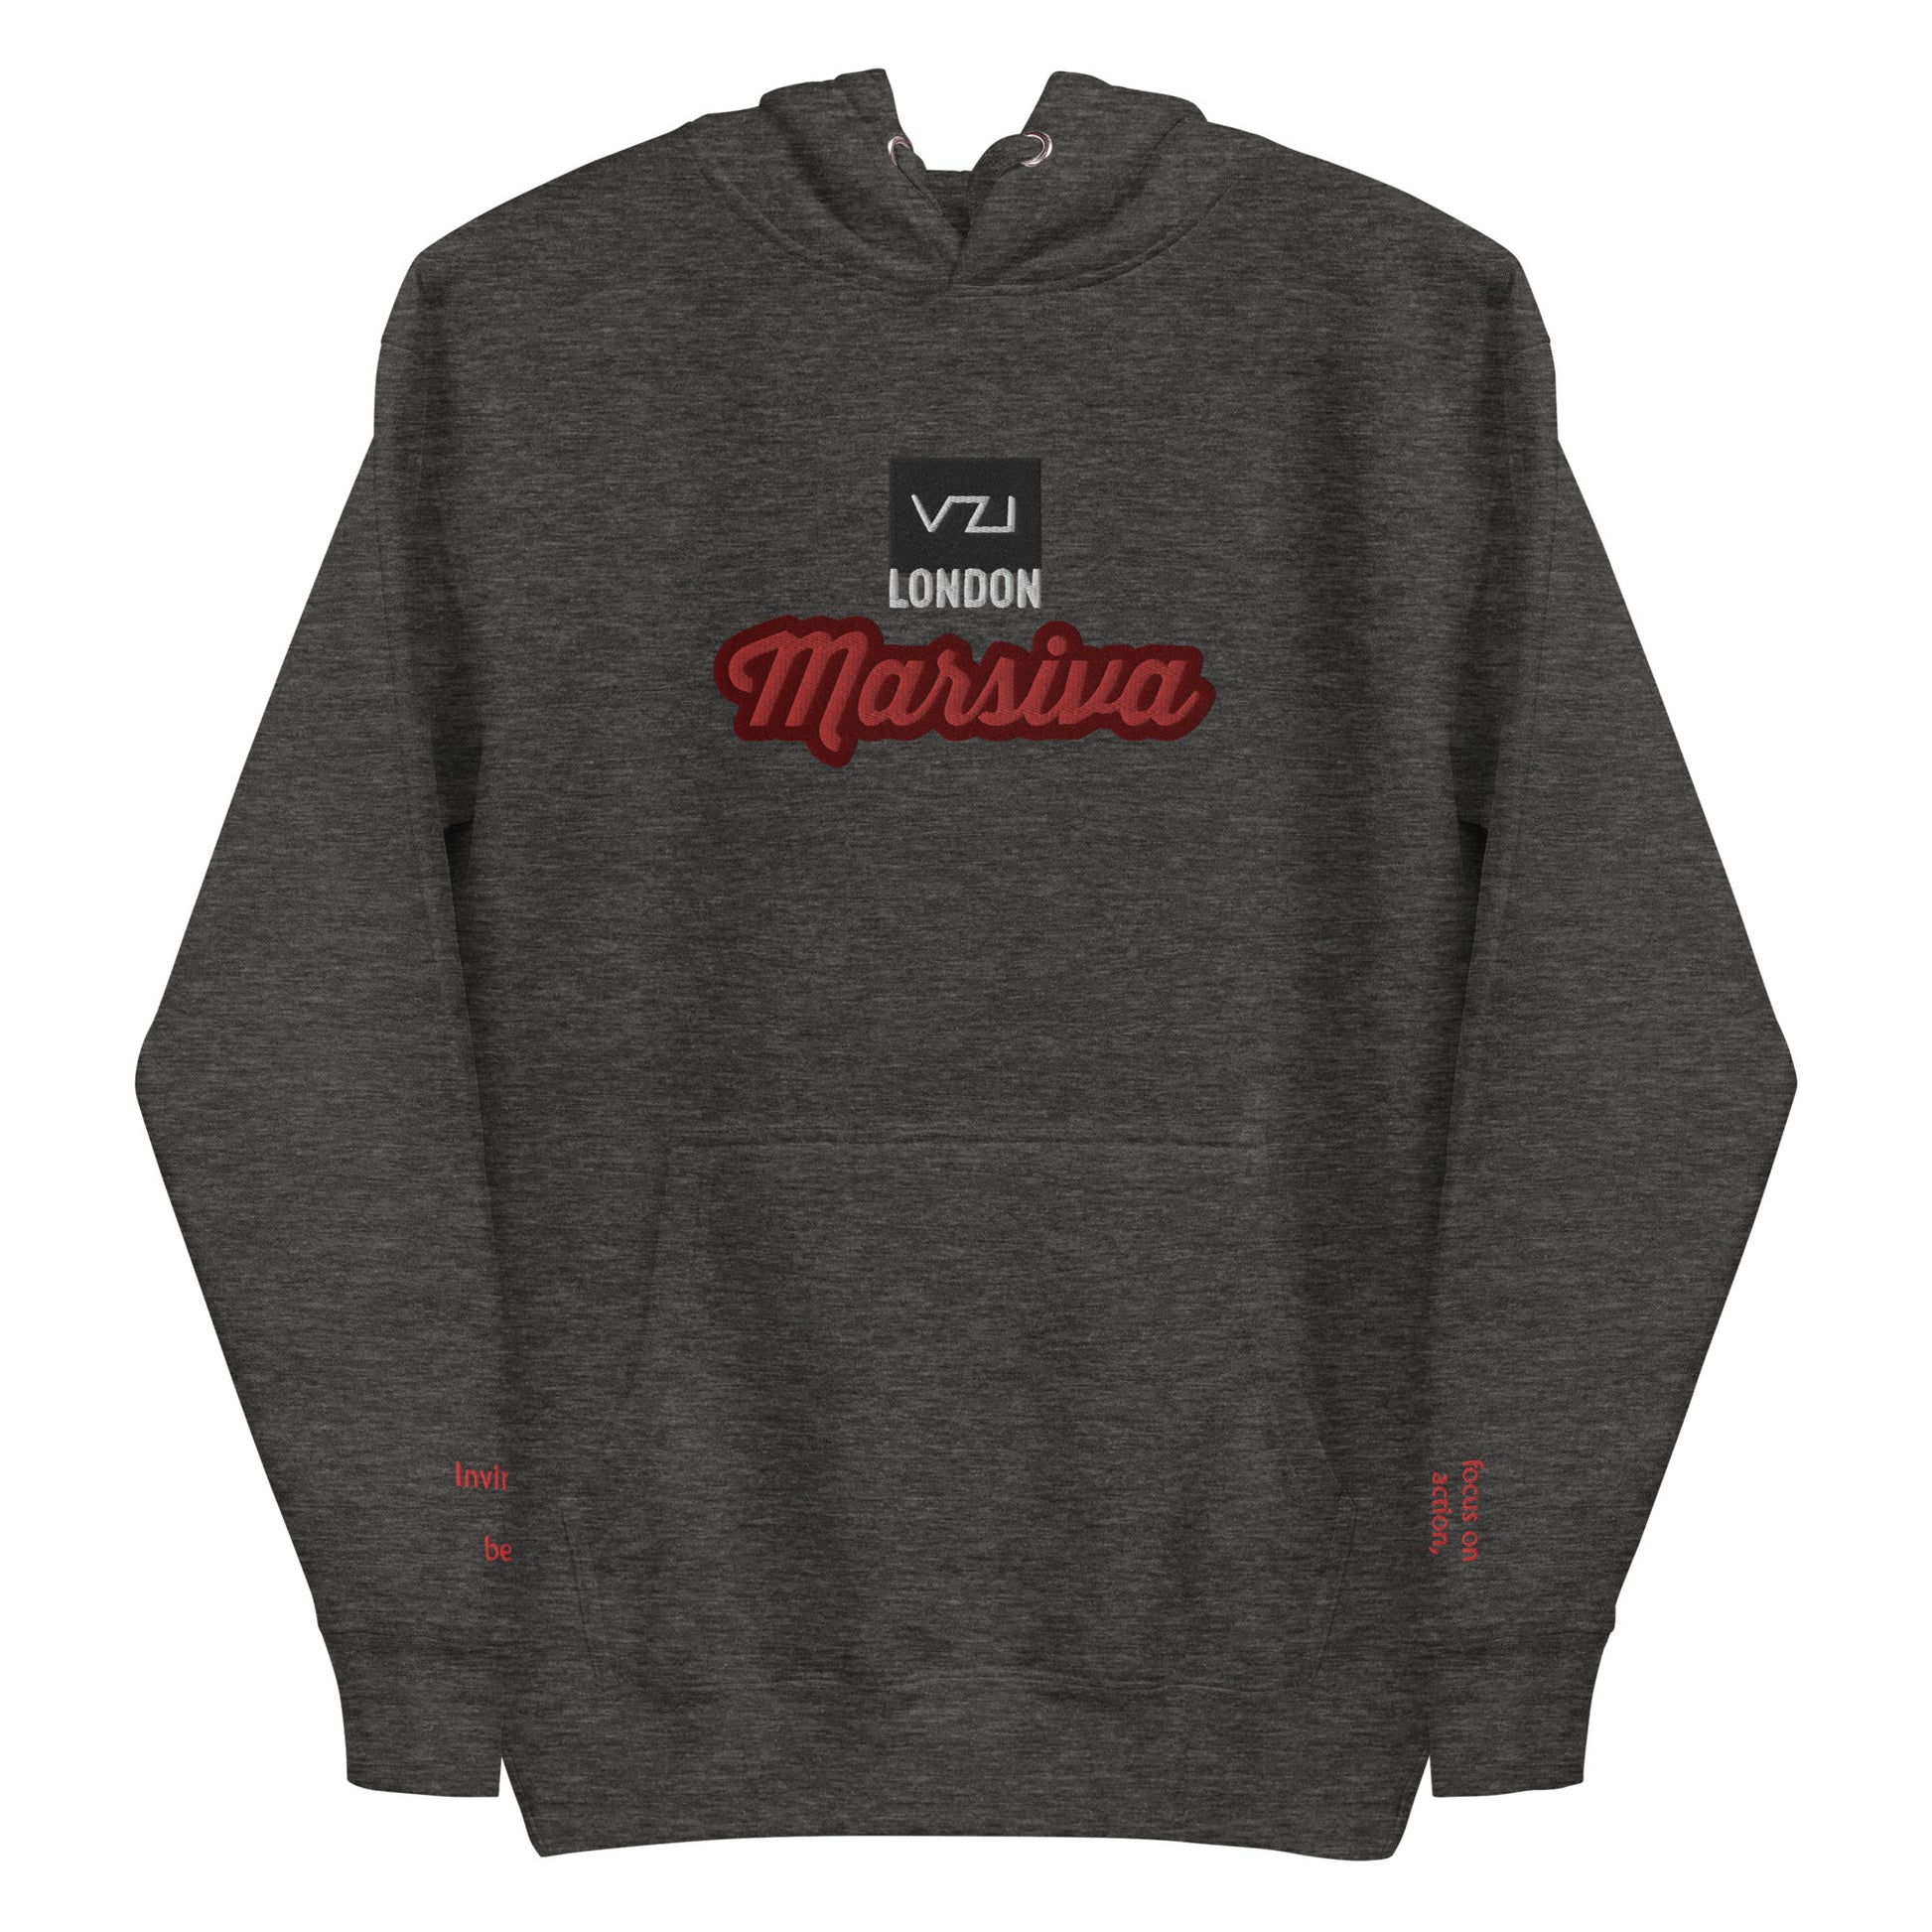 VZI Marsiva Unisex Hoodie - Classic Cotton for Action, Strength, and Power